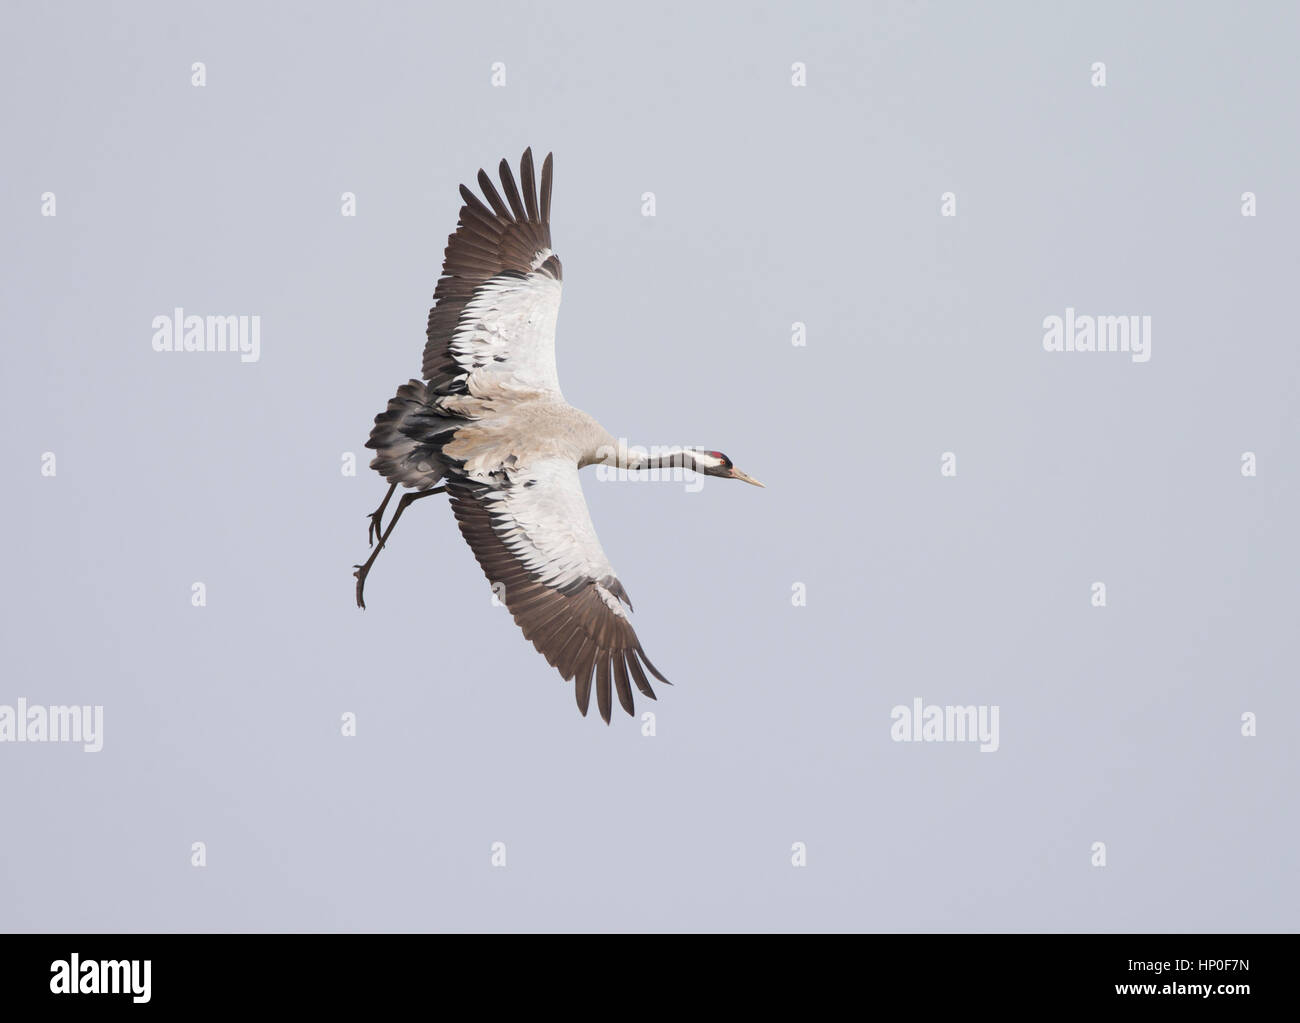 Crane (Grus grus) flying against grey blue sky coming into land with legs dangling down Stock Photo